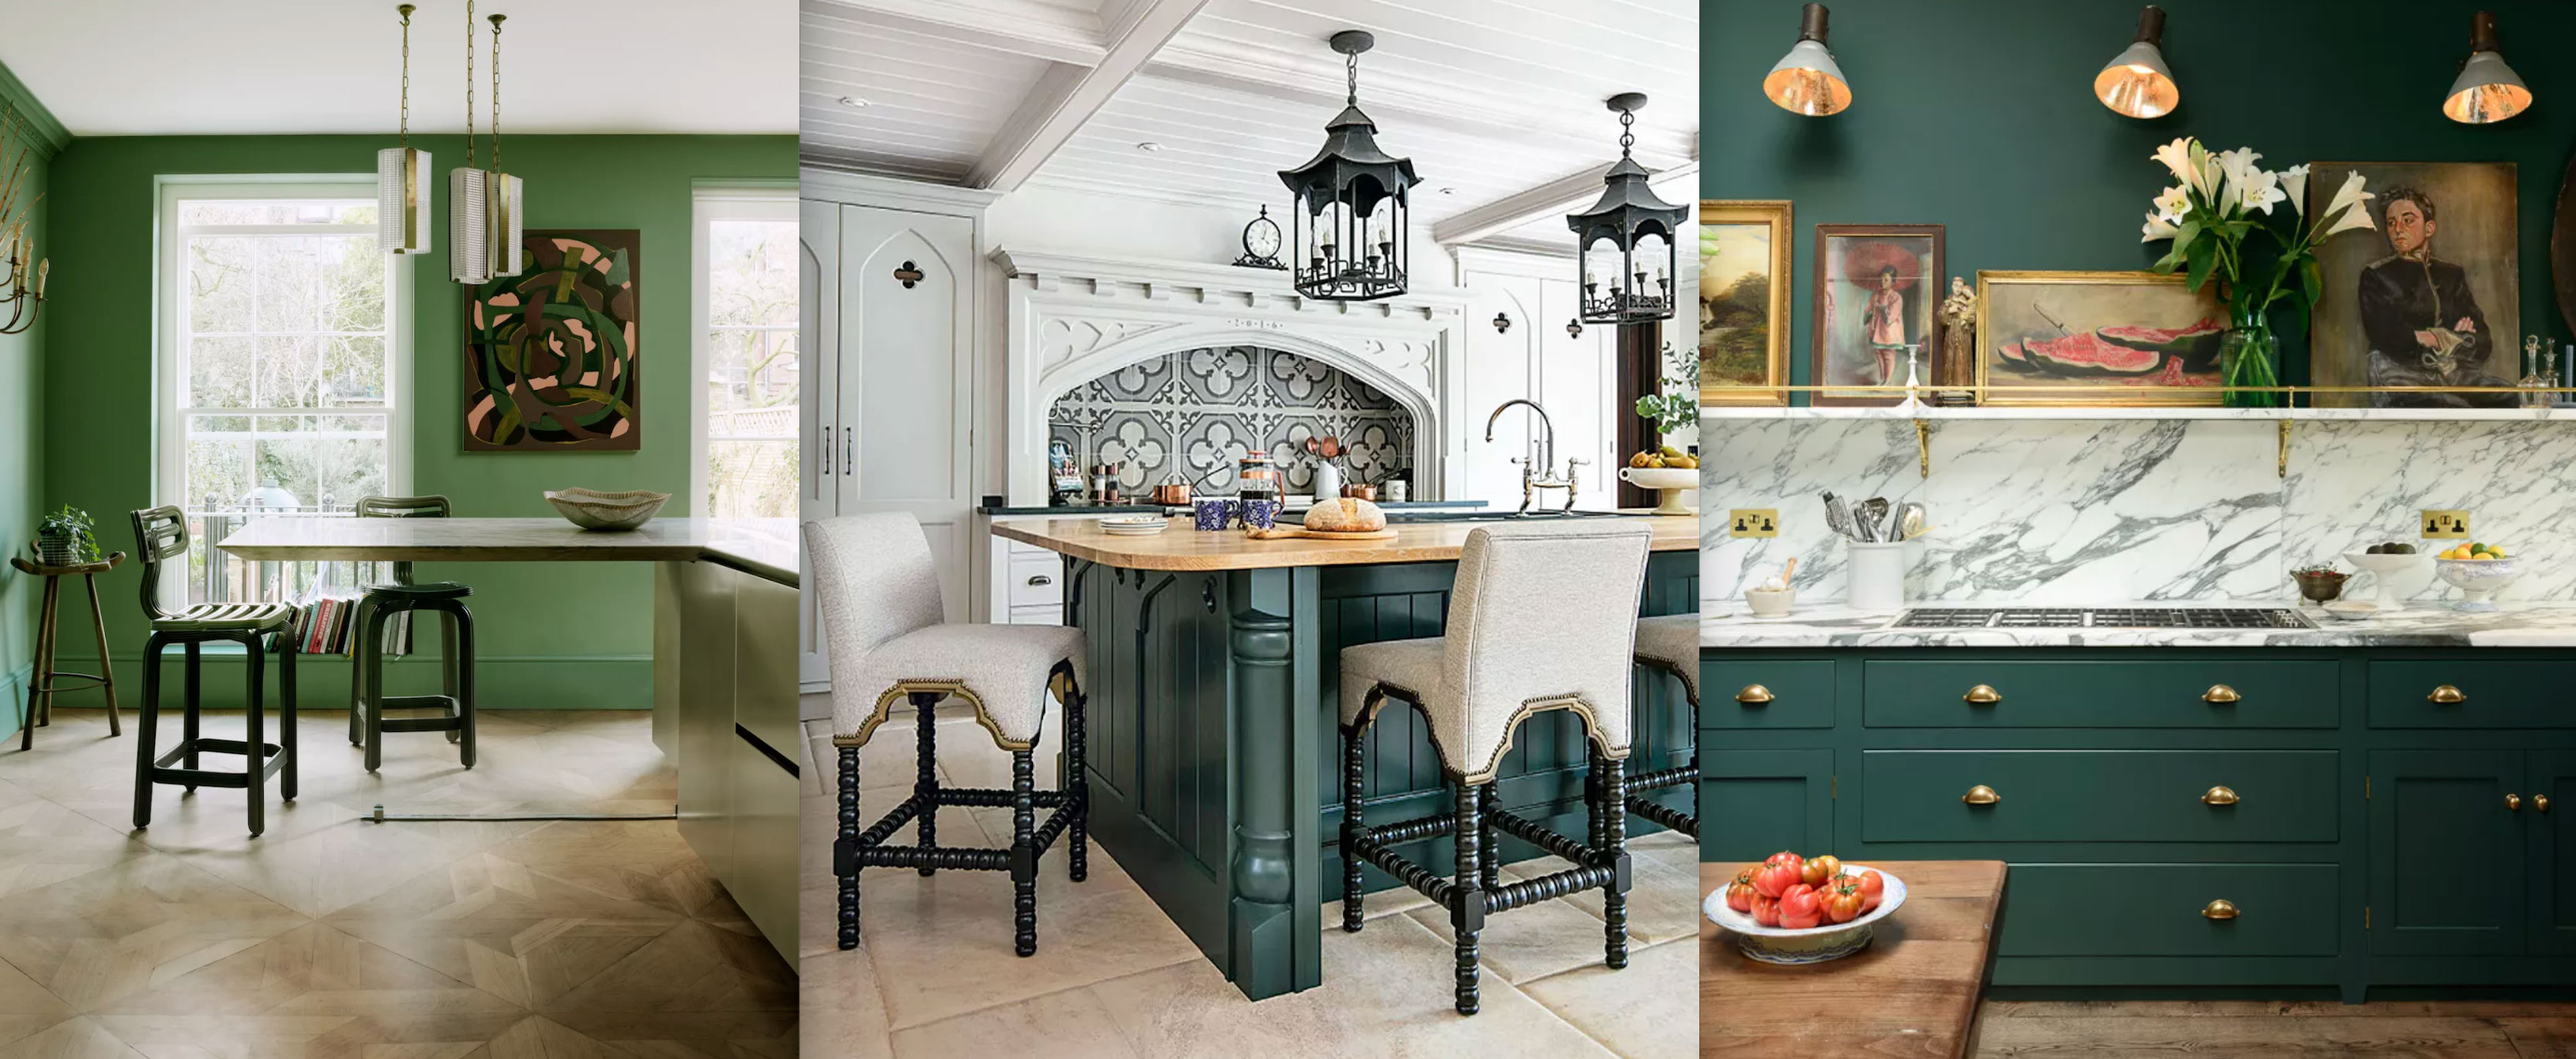 Green kitchen ideas 20 kitchens in sage, olive and apple   Homes ...